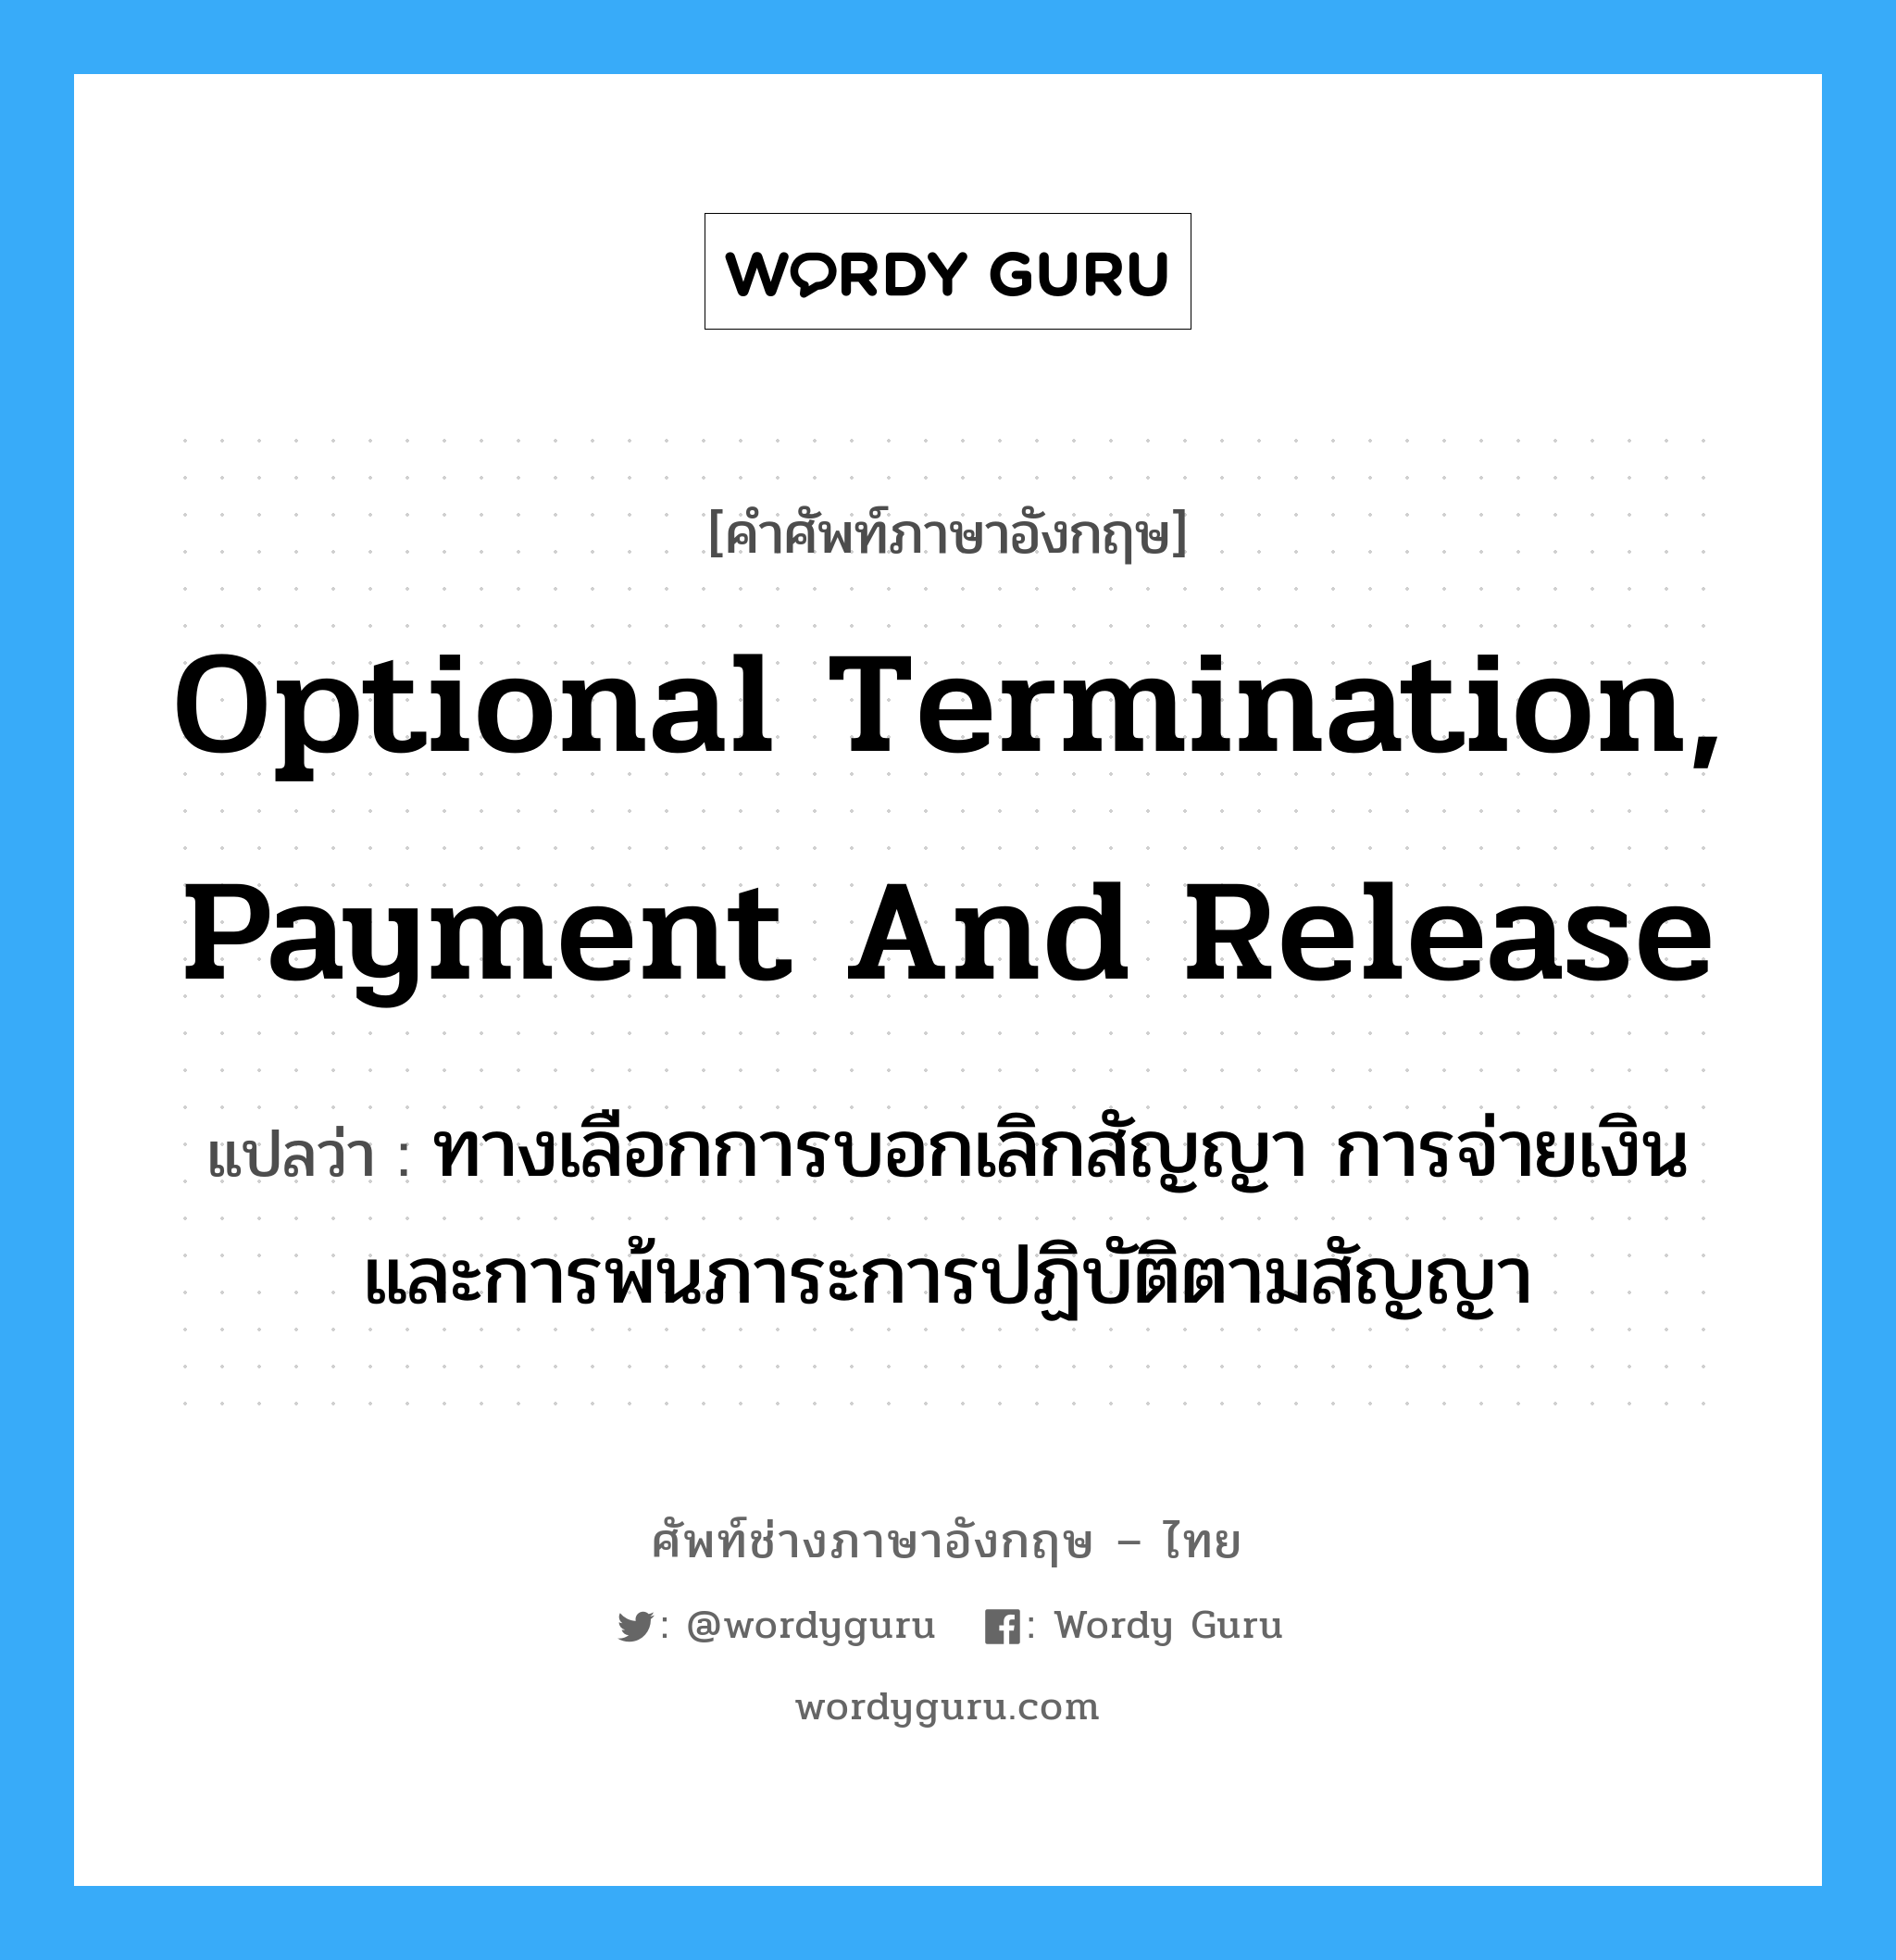 Optional Termination, Payment And Release แปลว่า? | Wordy Guru